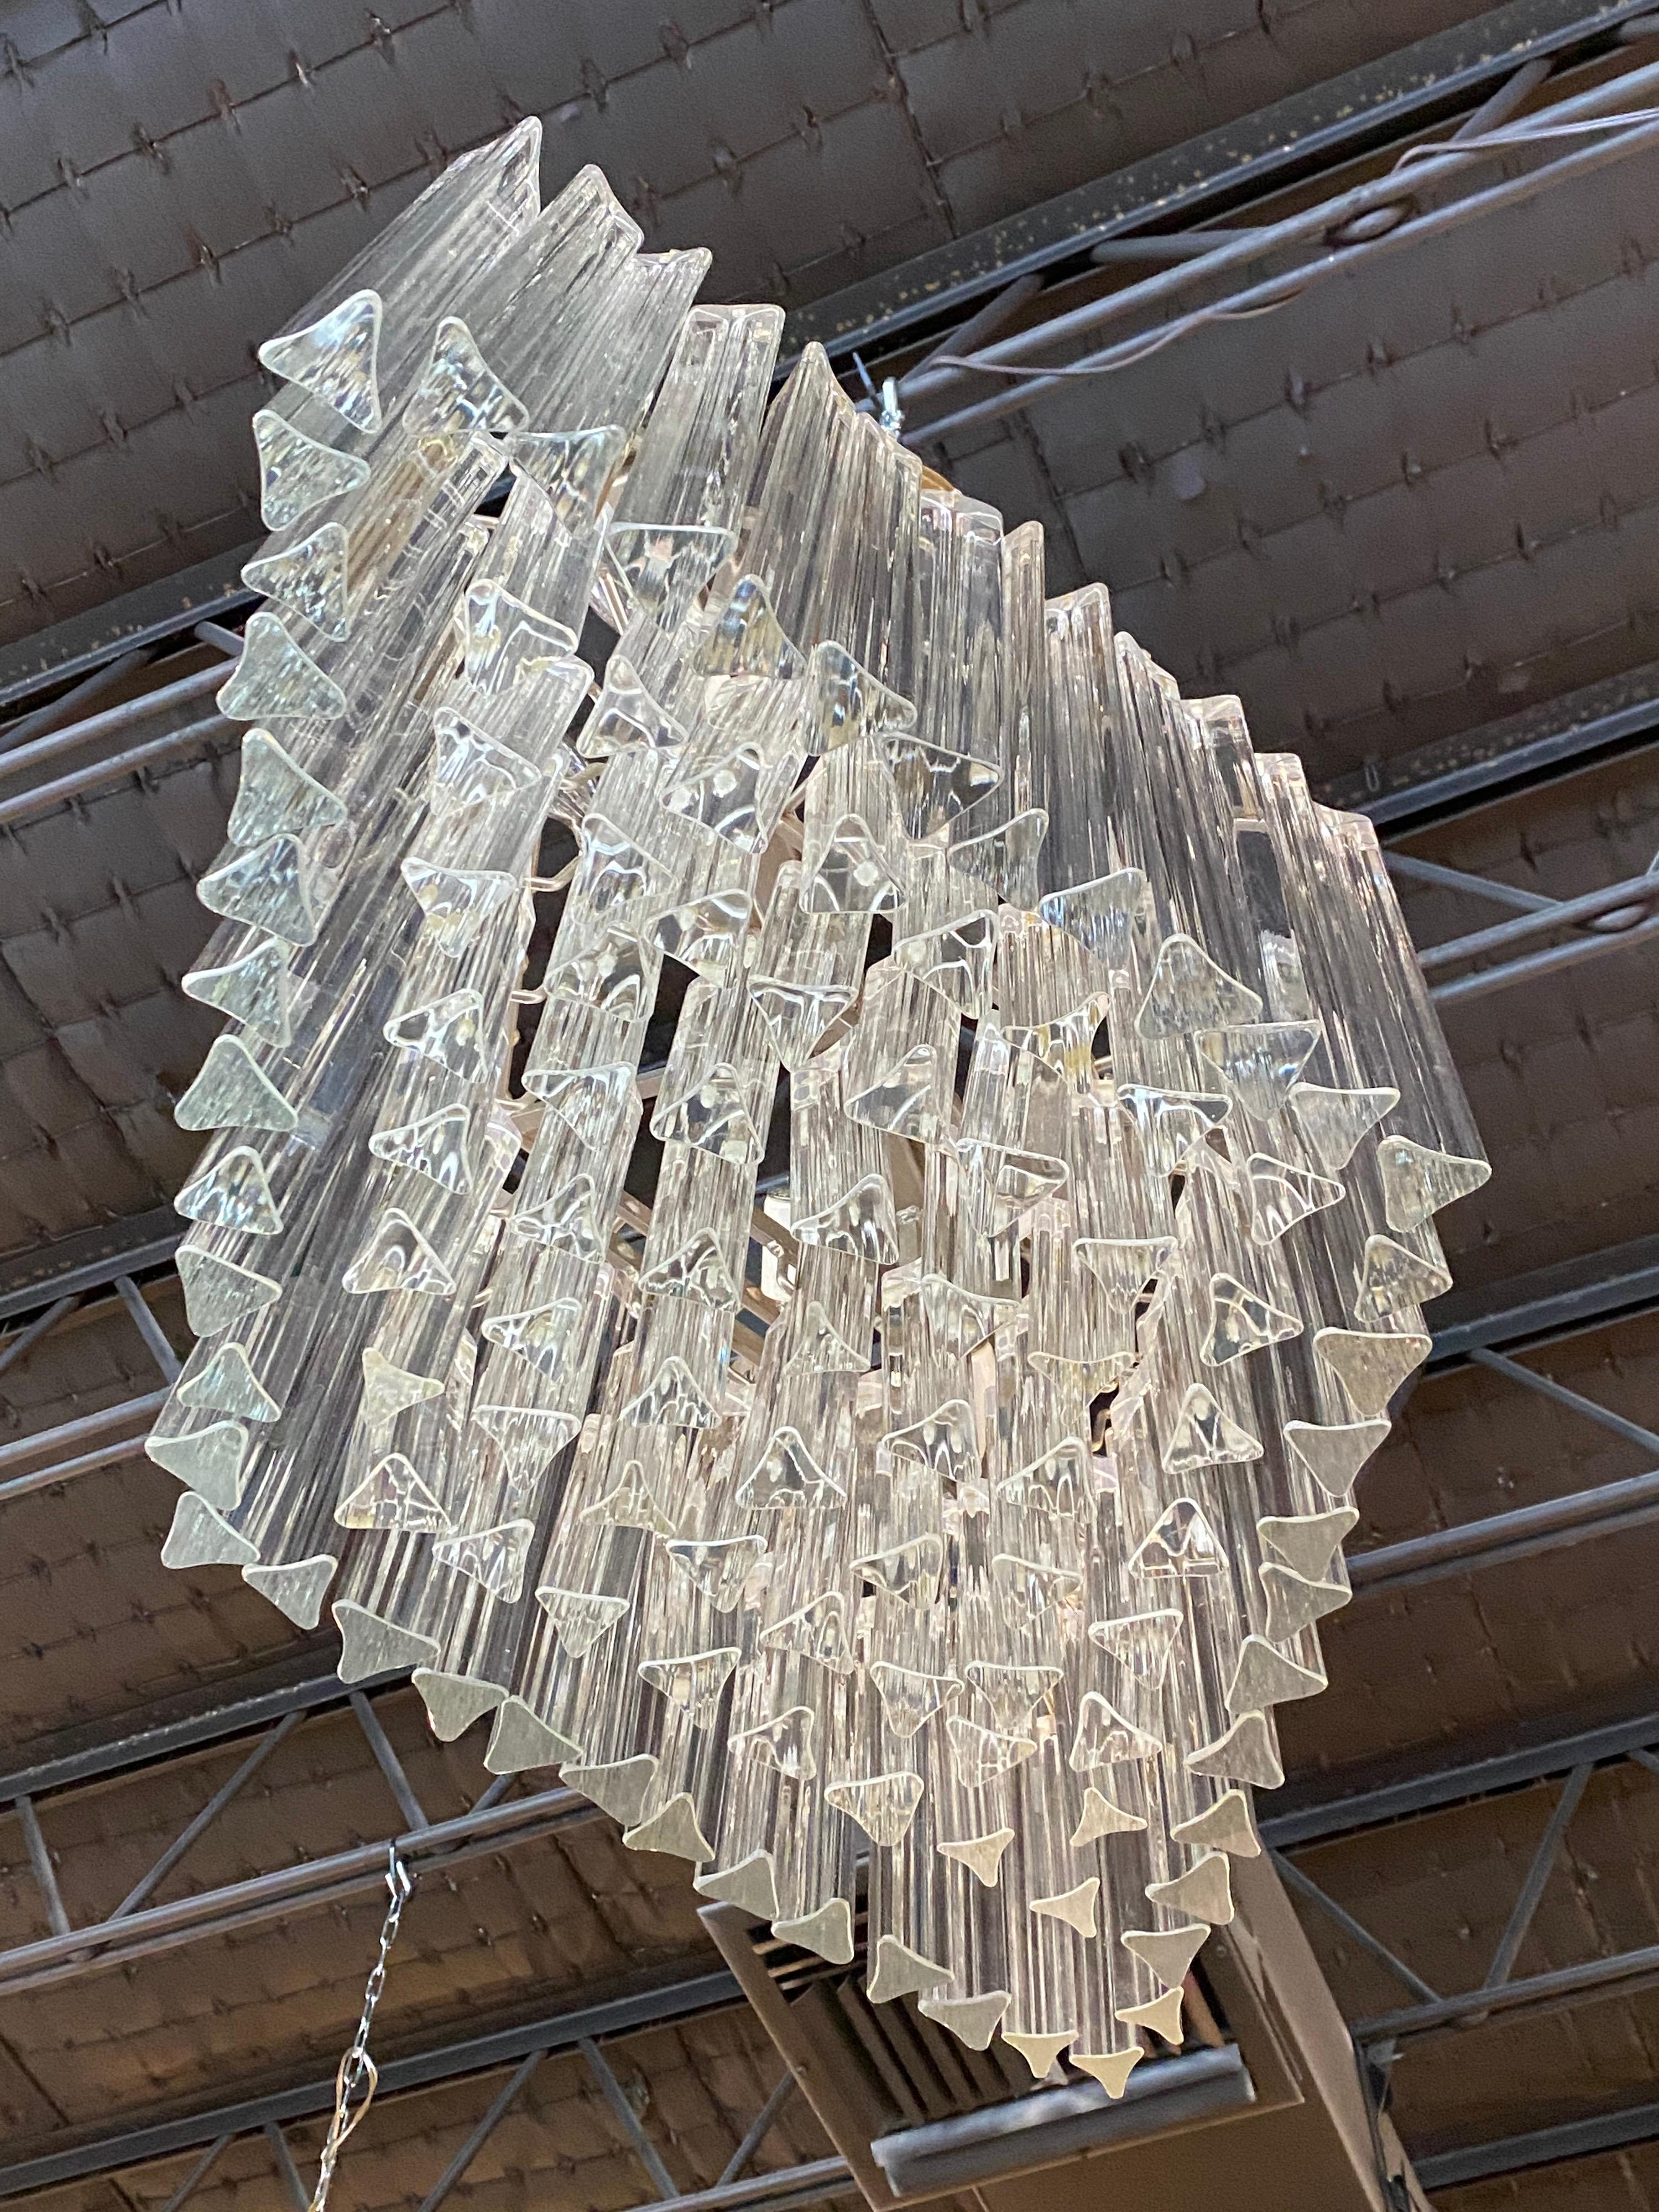 Beautiful large vintage Murano Camer chandelier. Holds 6 light bulbs. Has 104 glass tri lobe pieces with no broken or chipped glass. Chandelier cage metal may have some patina. Tested, working order. All glass pieces will be cleaned prior to